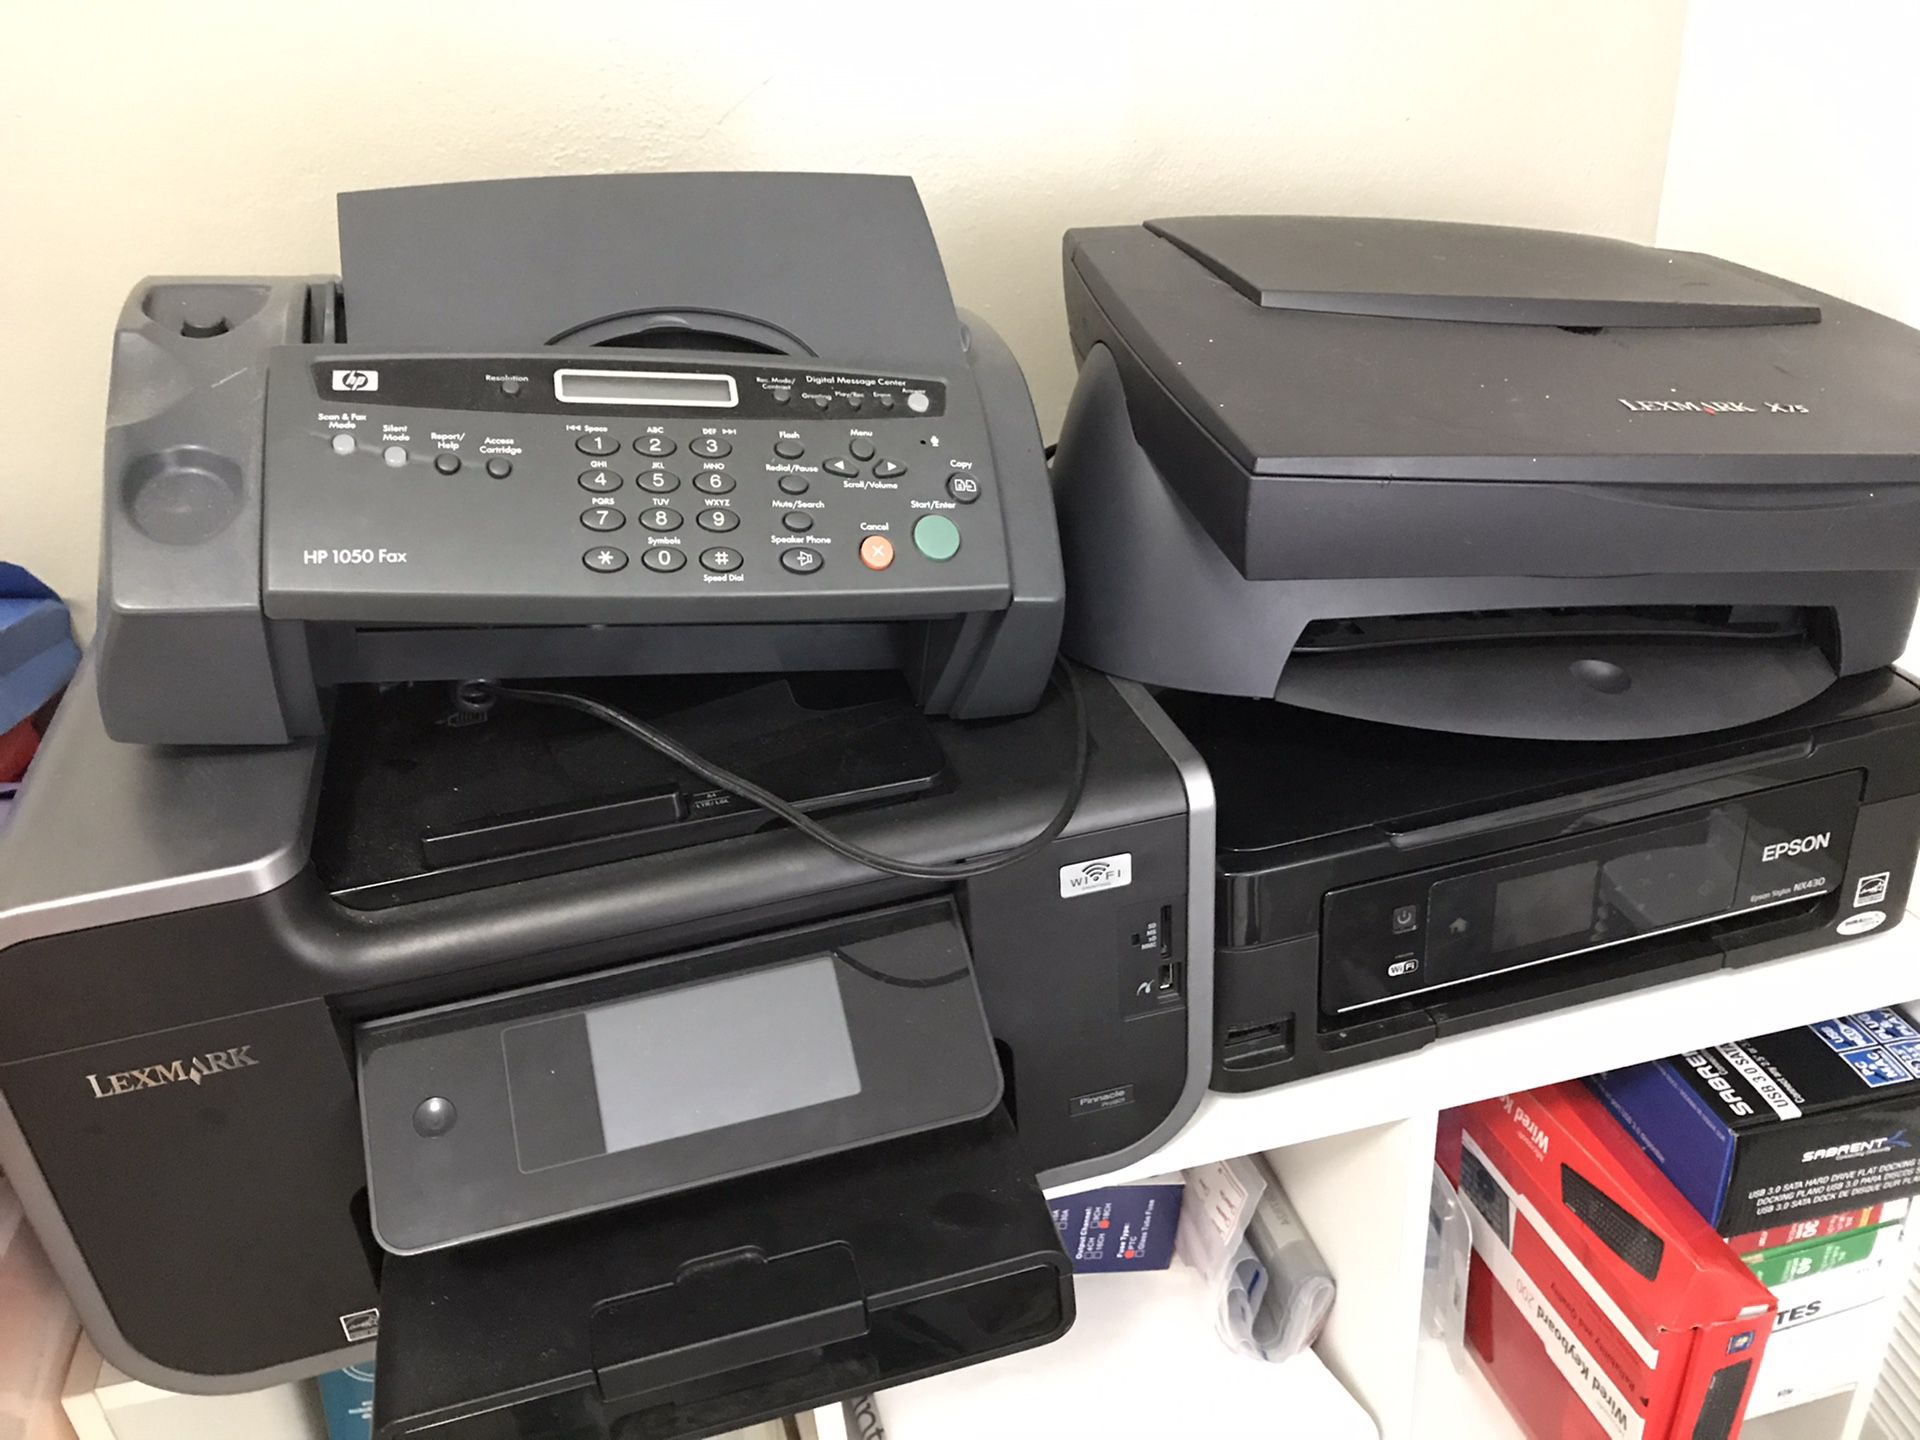 PCs, laptop and printers for parts and recycling. Some devices may be working